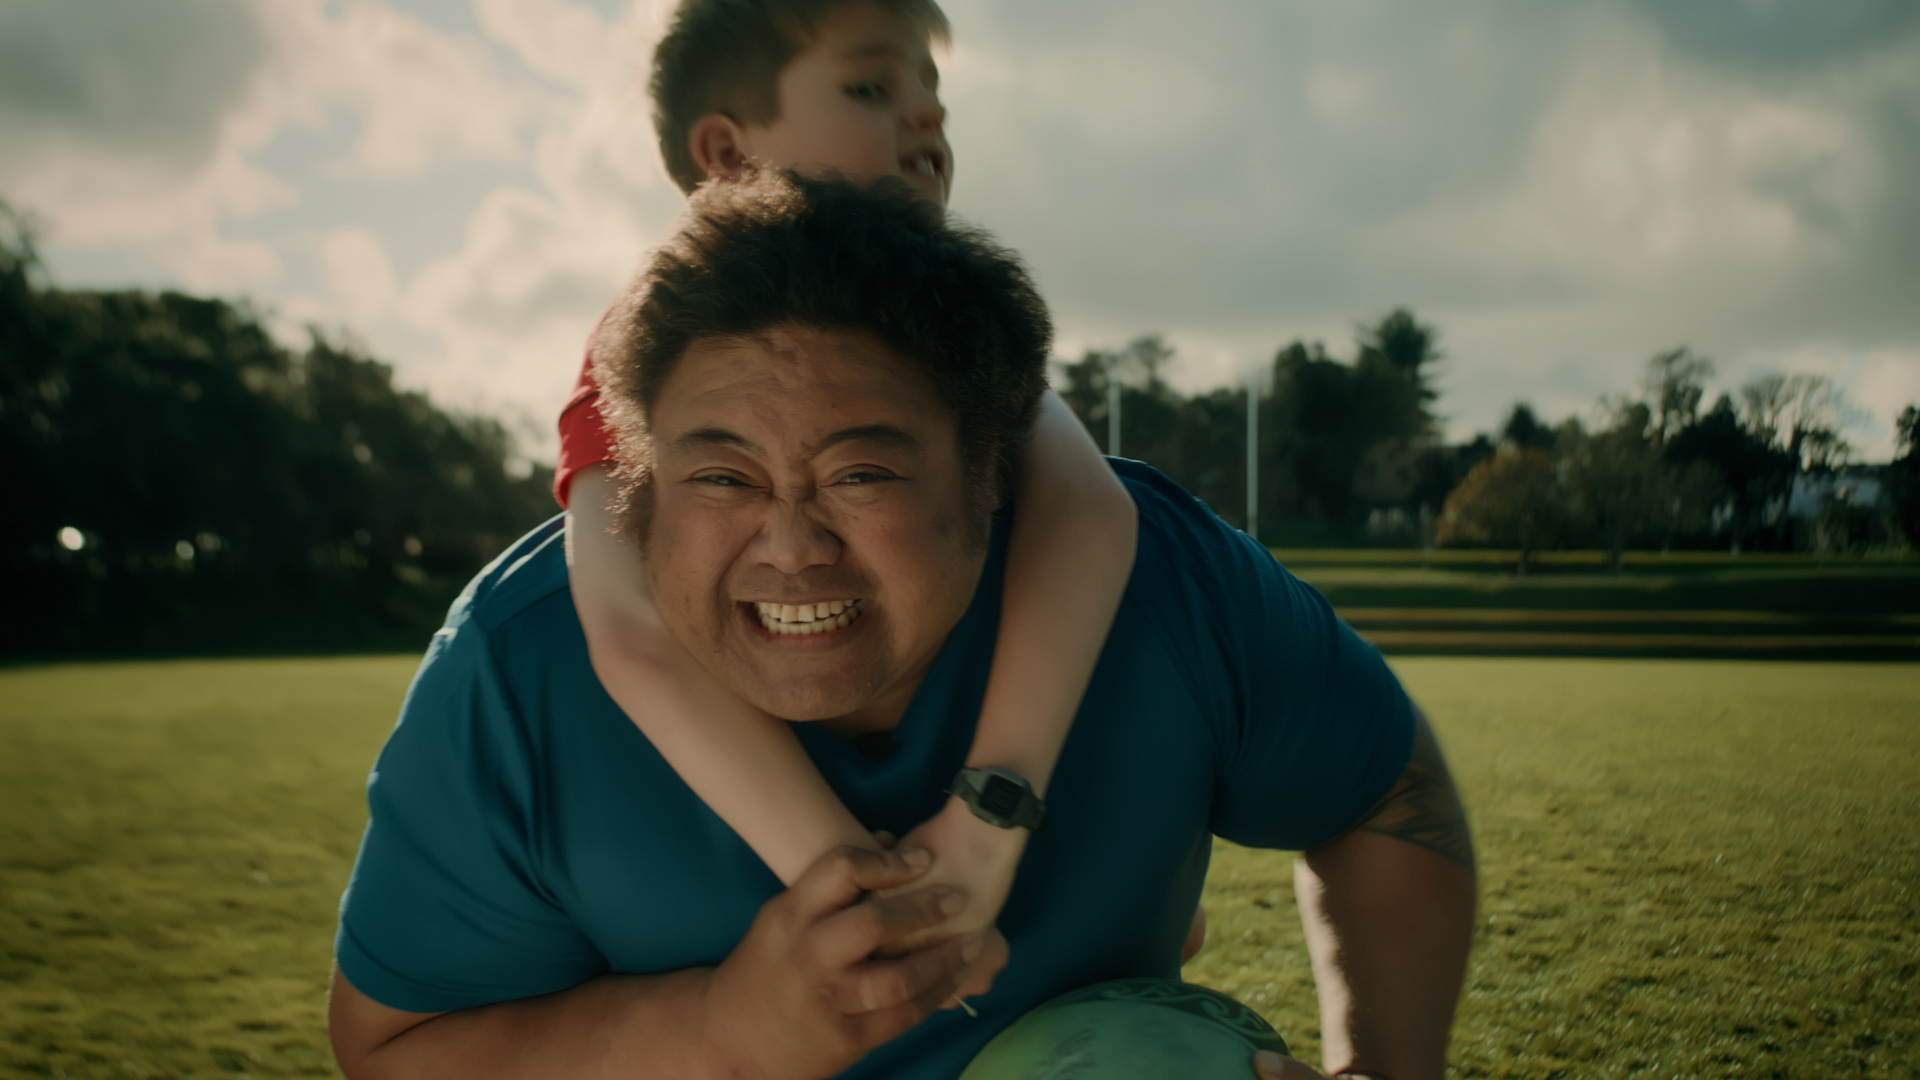 A man struggles to score a rugby try as a kid clings to his neck